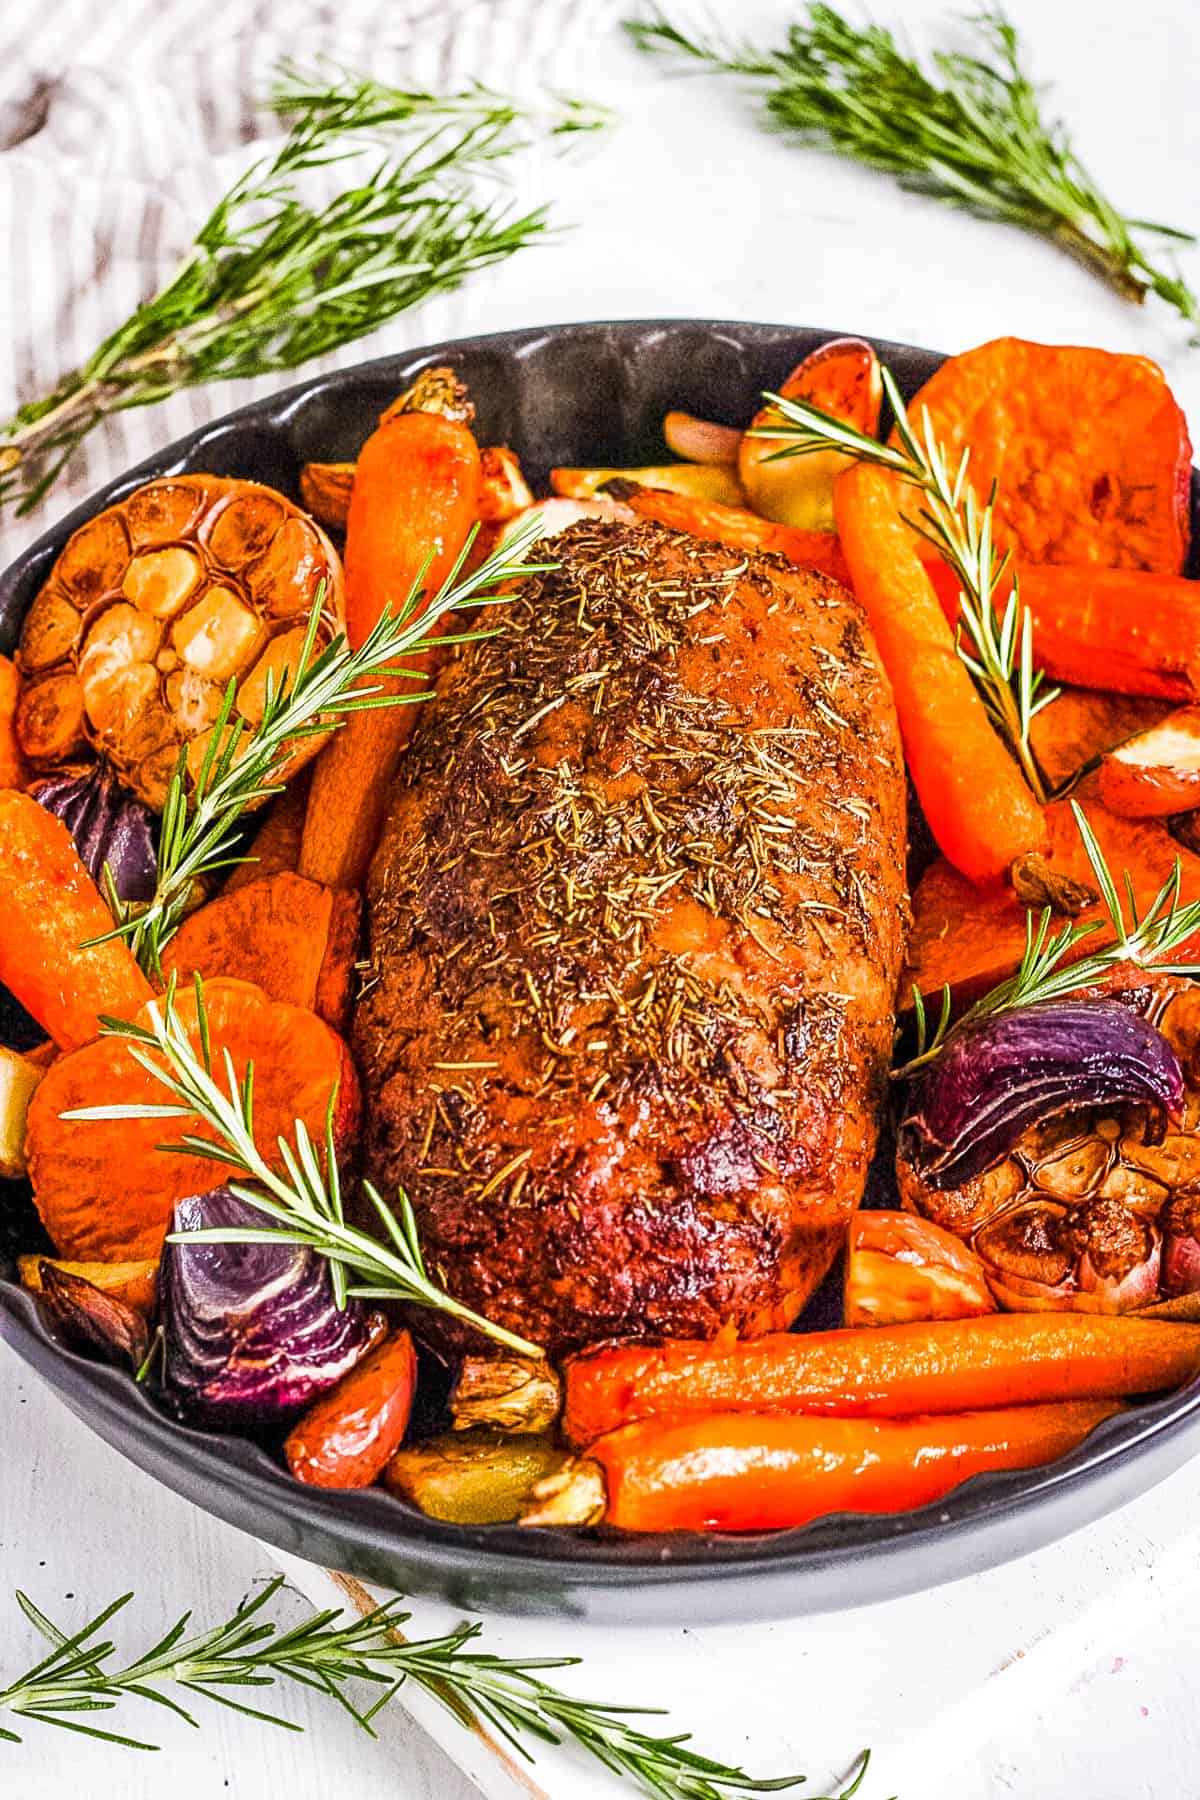 Vegan turkey roast in a serving dish with roasted vegetables surrounding it.